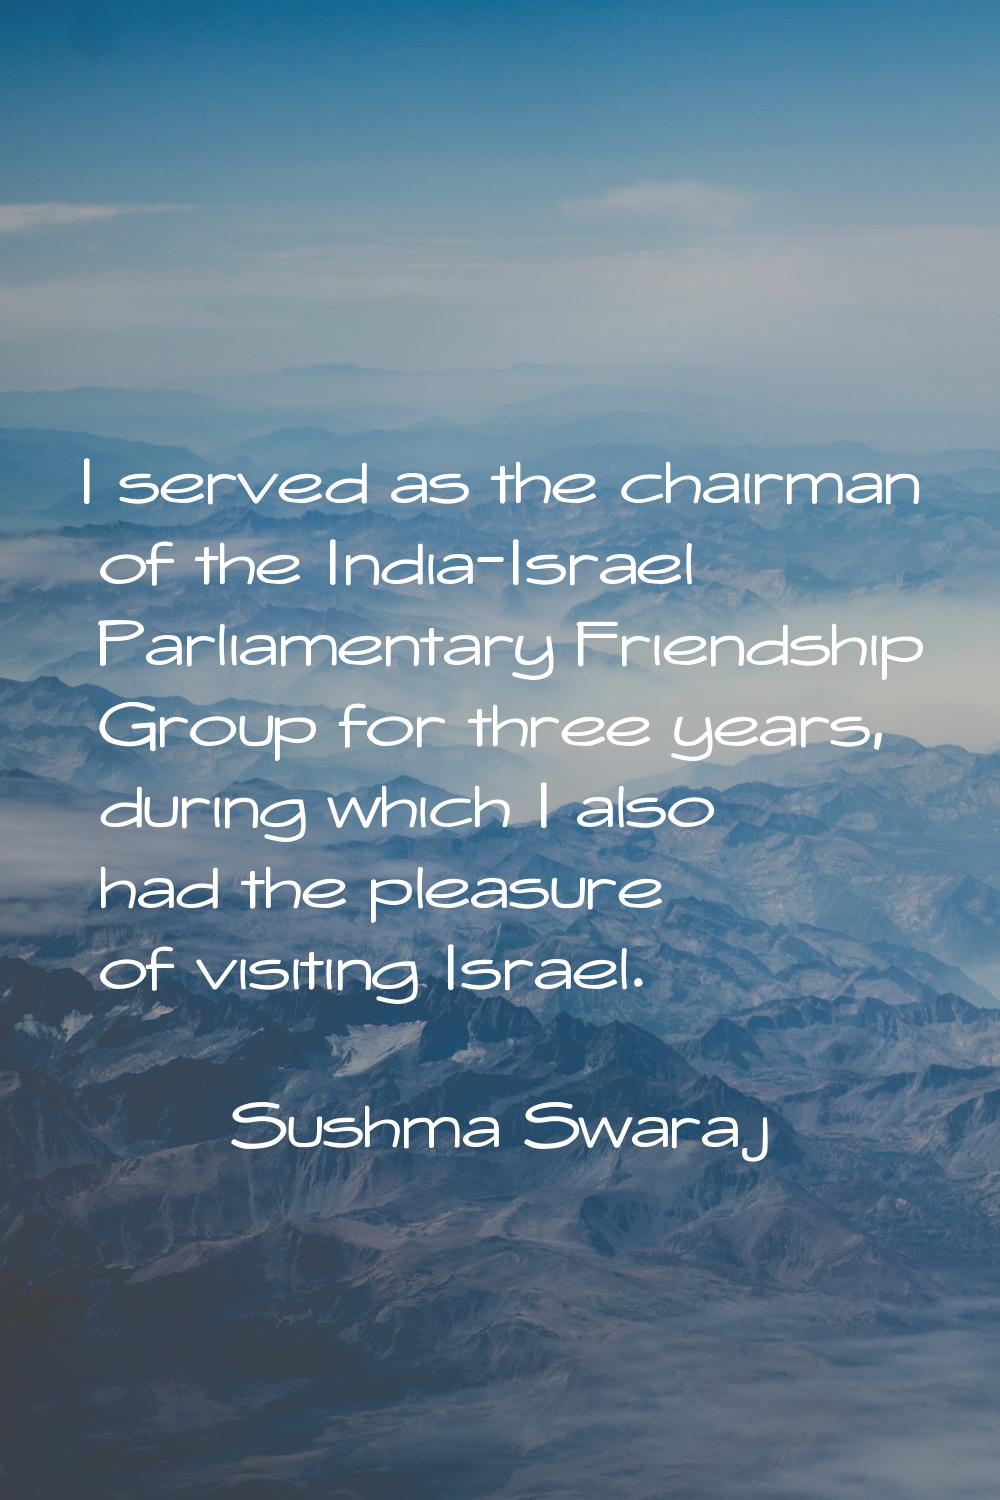 I served as the chairman of the India-Israel Parliamentary Friendship Group for three years, during